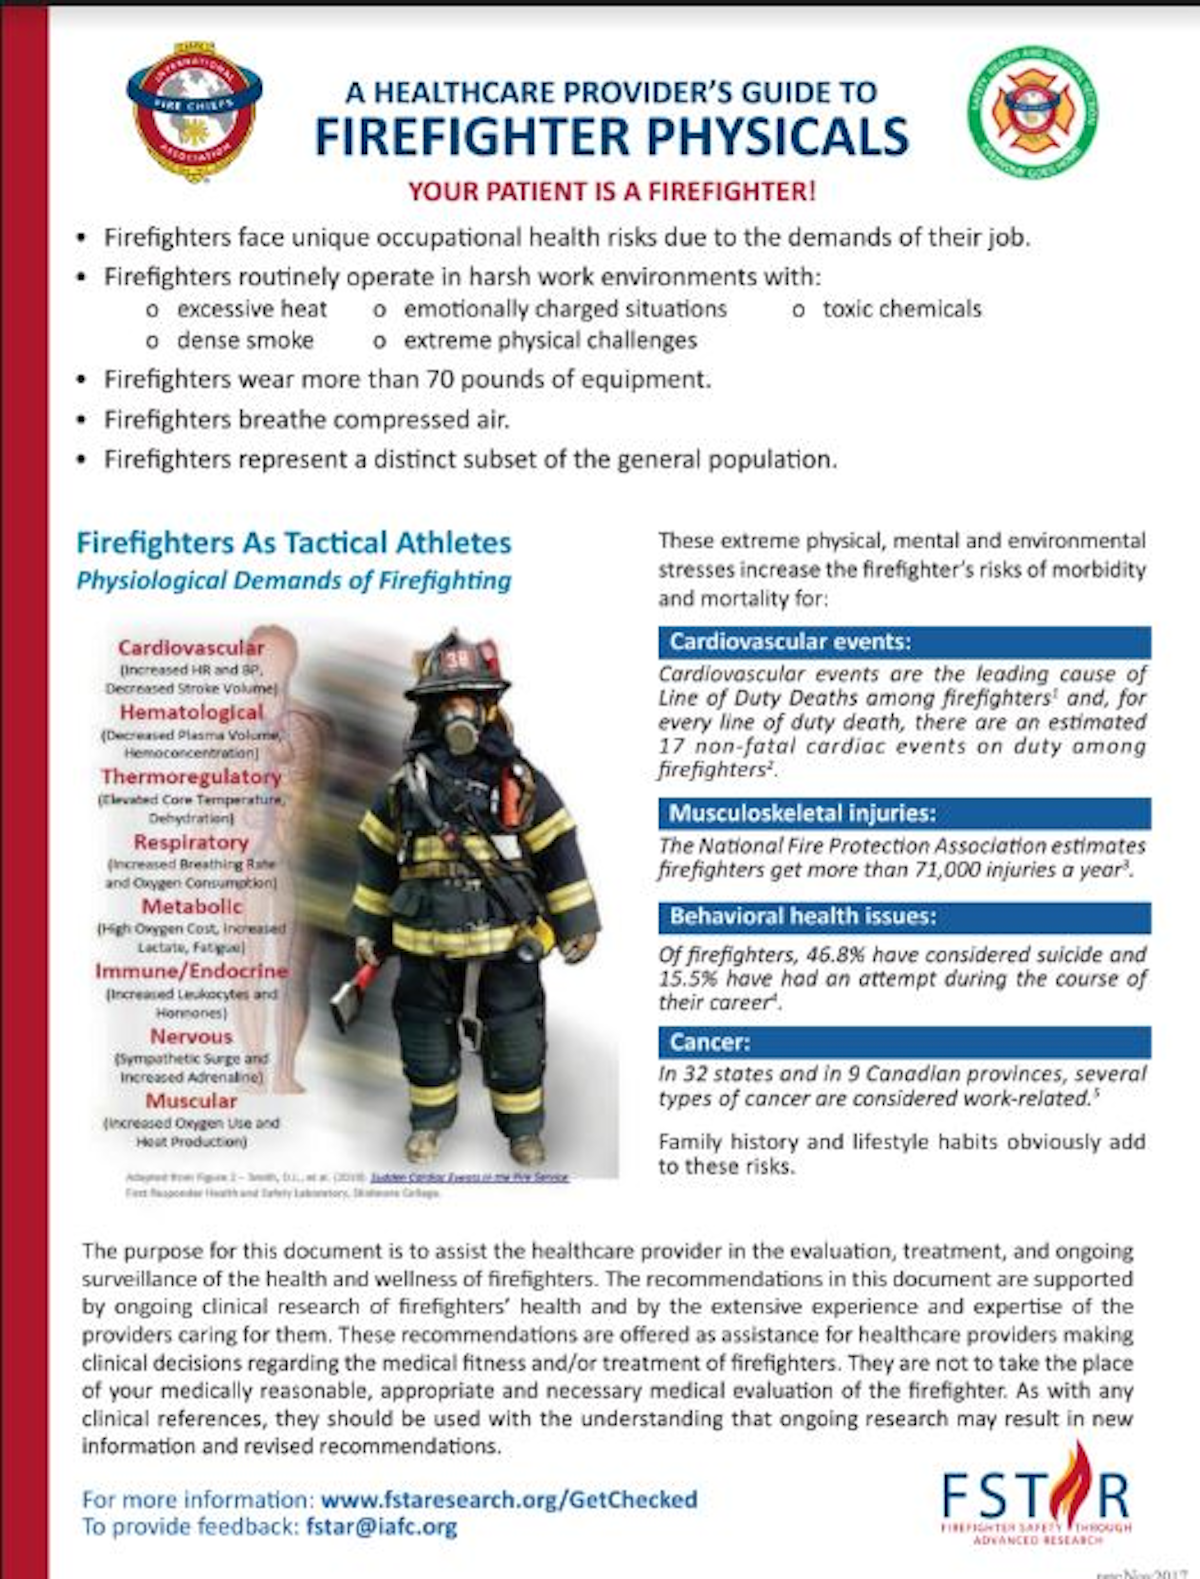 IAFC Releases Guide for Firefighter Physicals - Firefighter News ...